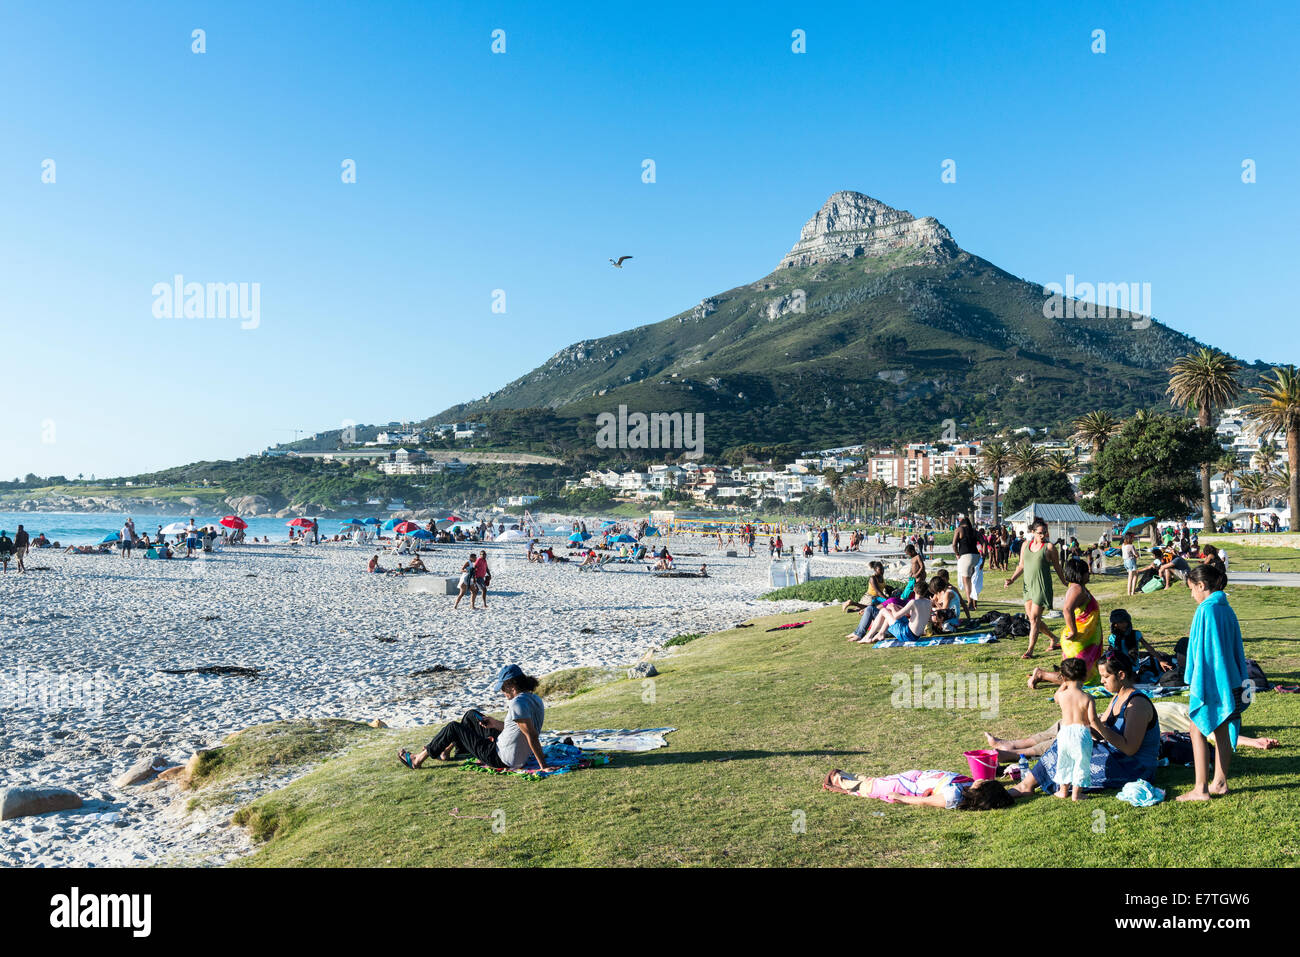 People on the beach of Camps Bay, Cape Town, South Africa Stock Photo